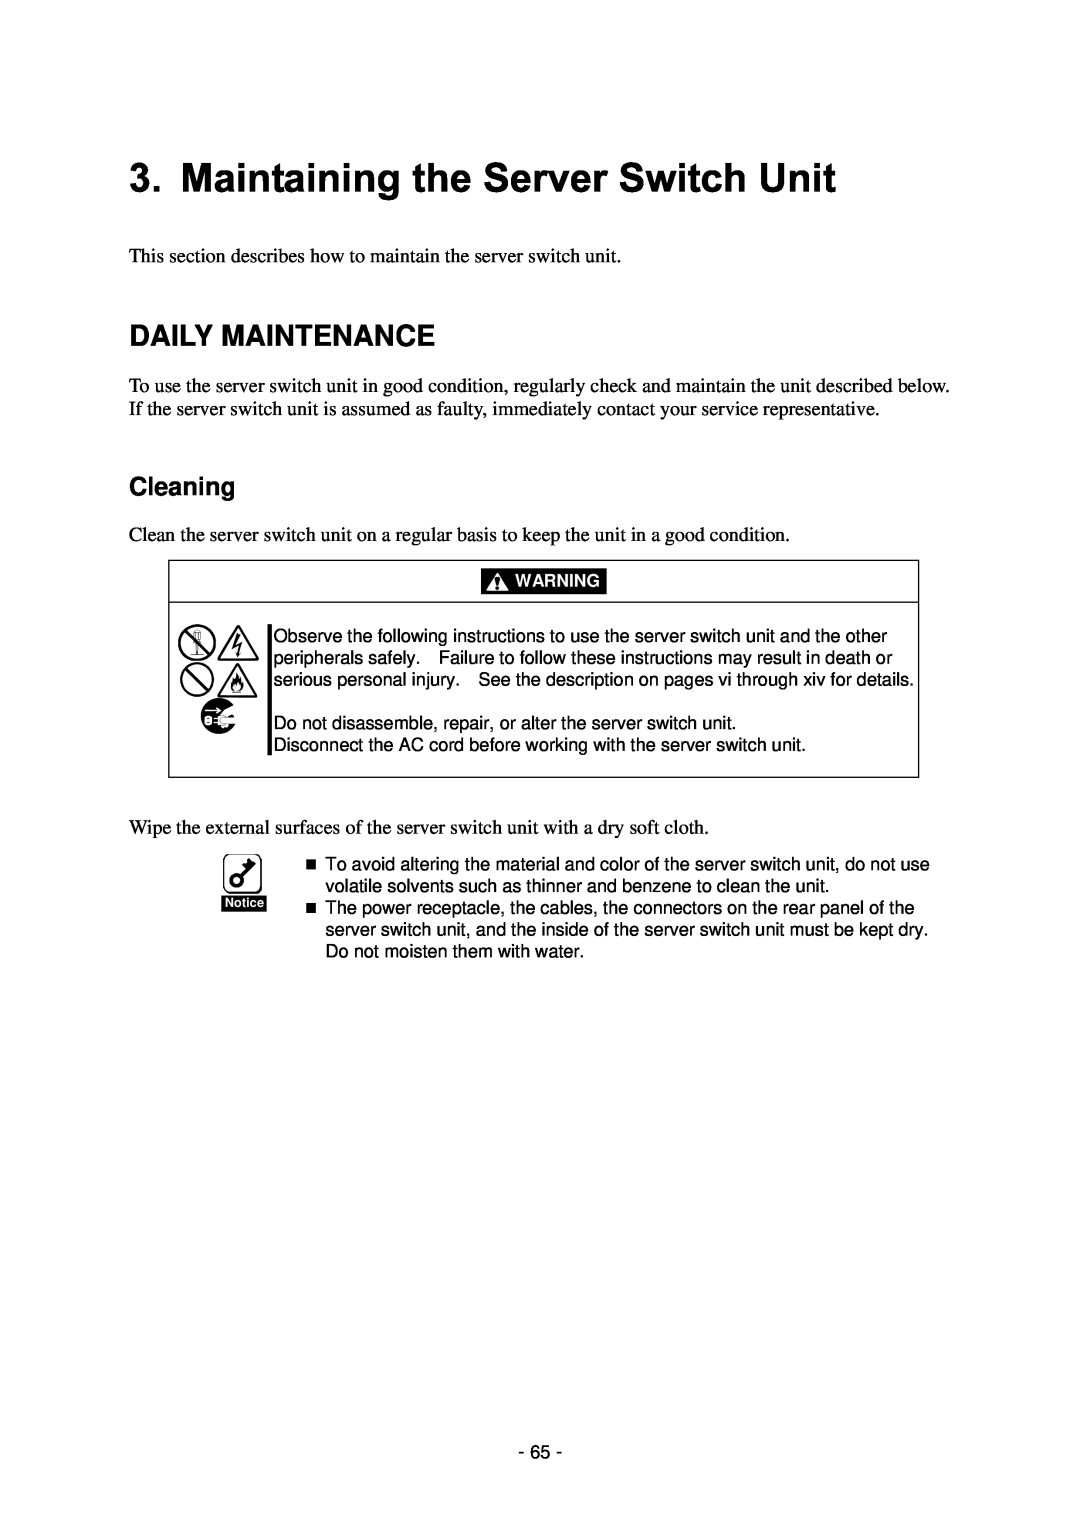 NEC N8191-09 manual Daily Maintenance, Cleaning 